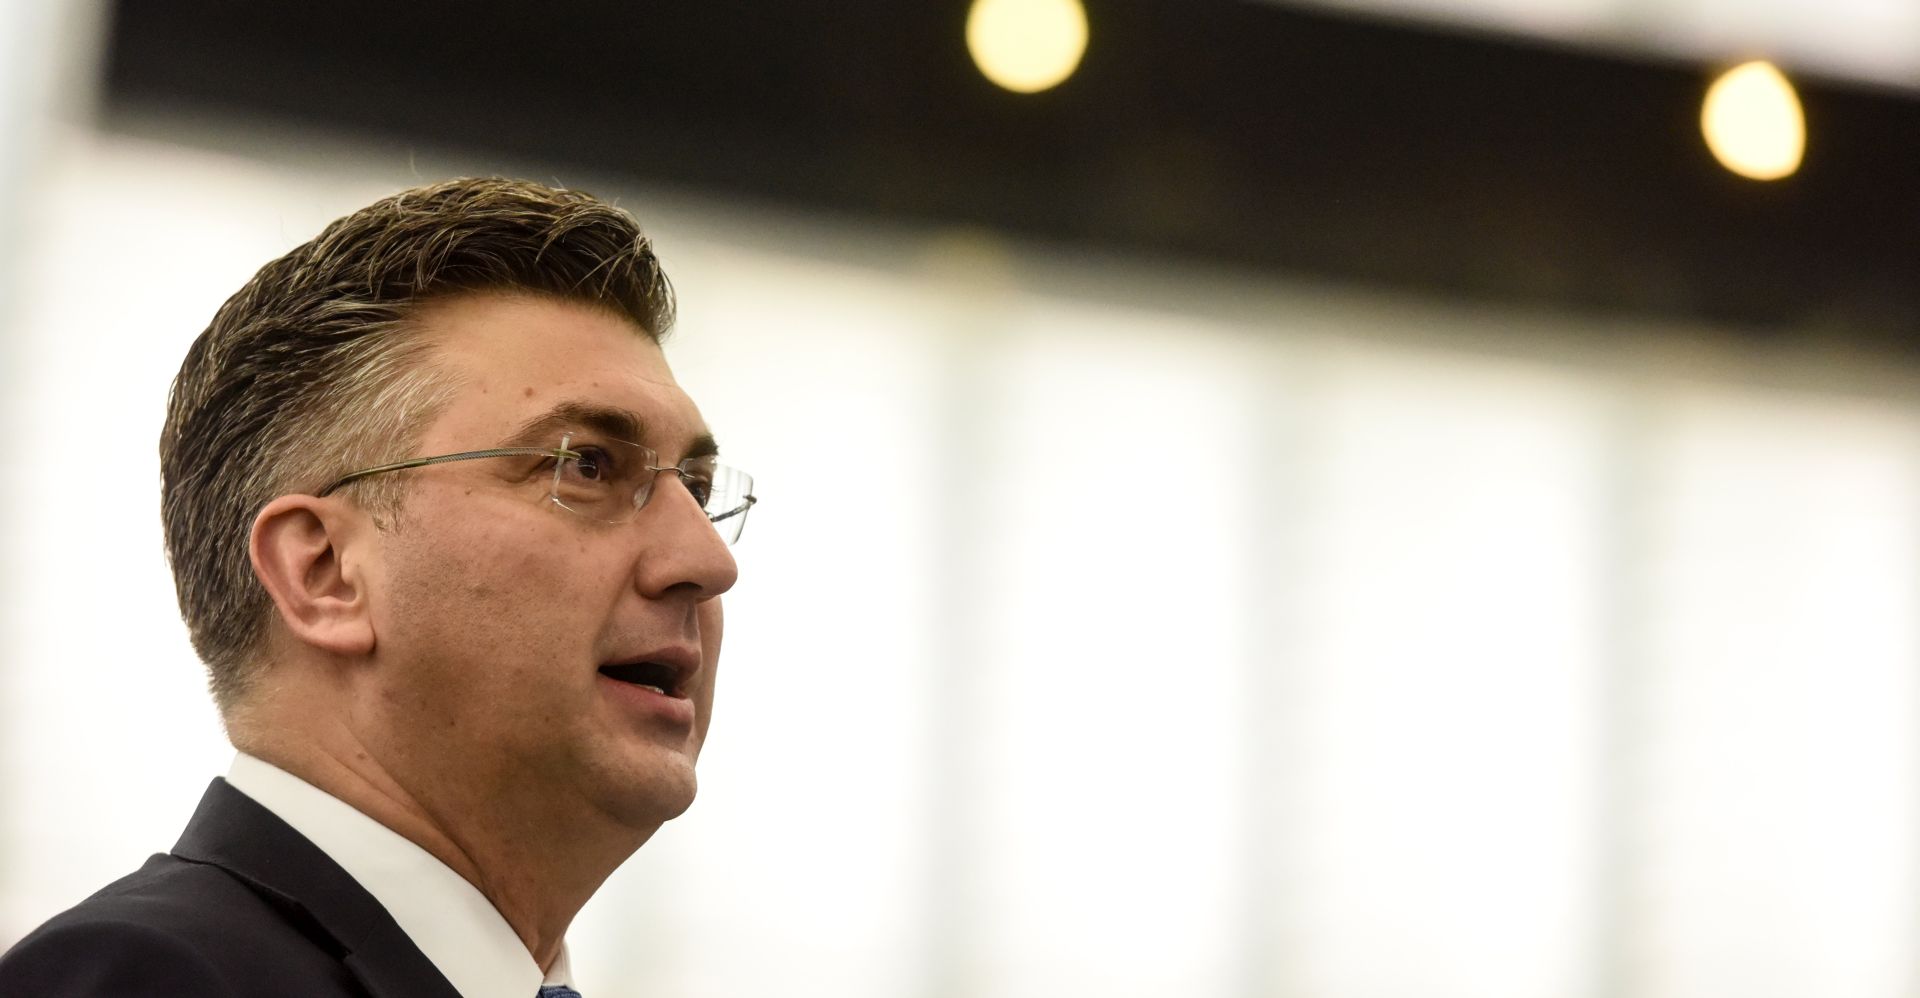 epa06499729 Croatia's Prime Minister Andrej Plenkovic delivers his speech at the European Parliament in Strasbourg, France, 06 February 2018. The European Union's parliament met on 06 February for a debate on the future of the EU.  EPA/PATRICK SEEGER